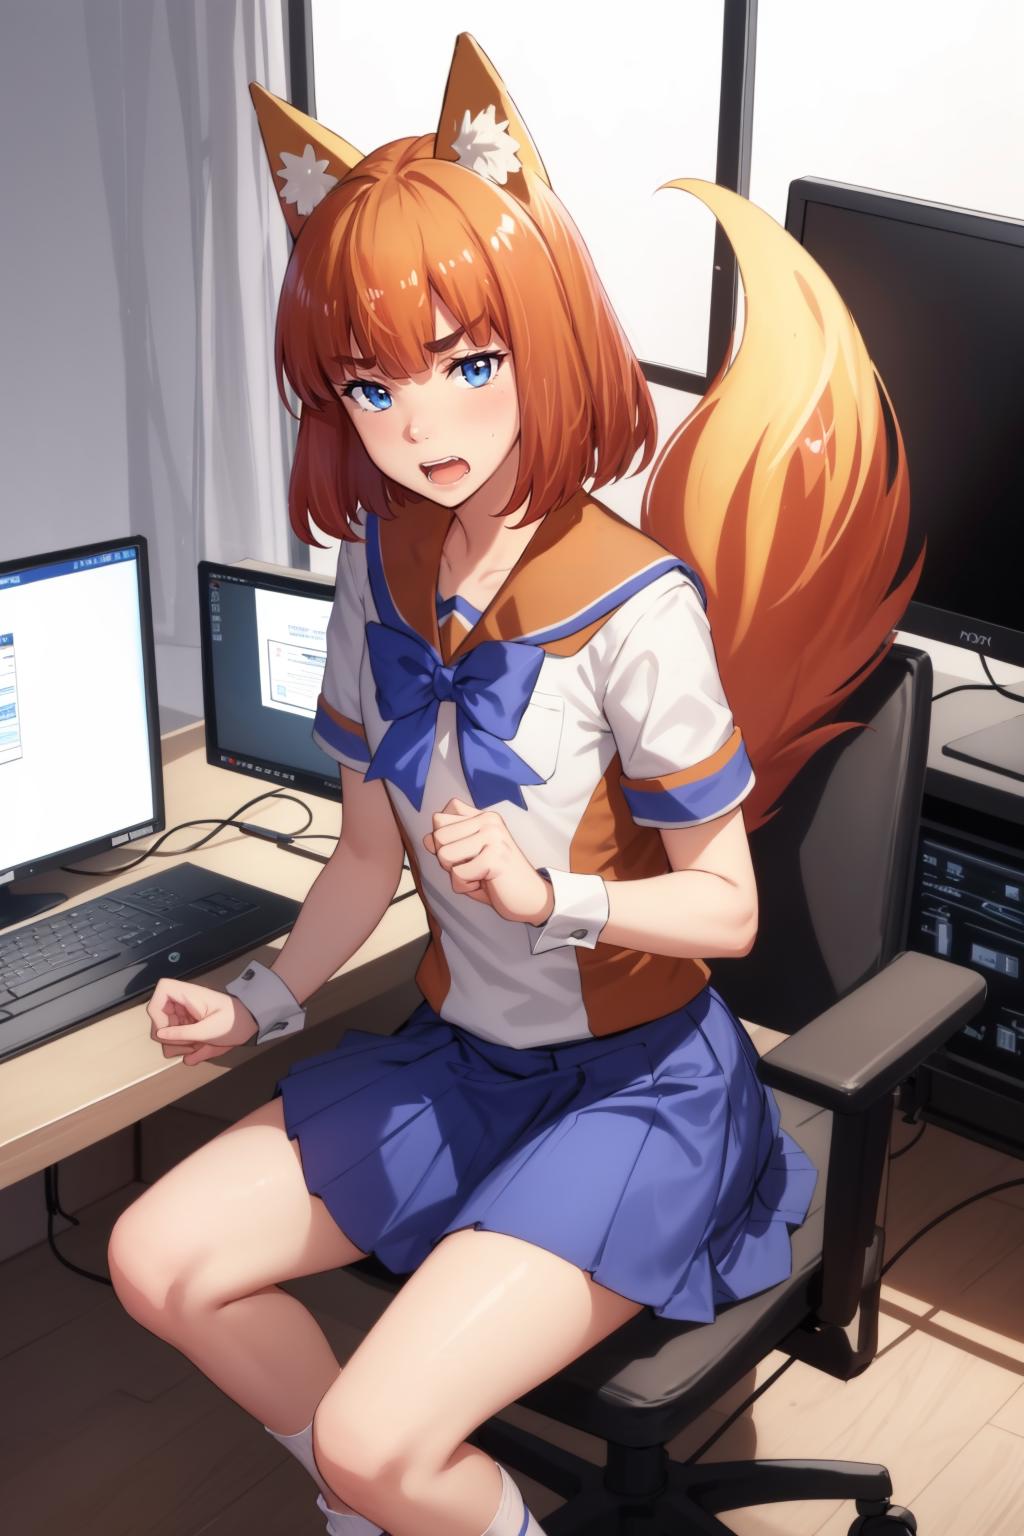 Mozilla Firefox-chan (Merryweather) LoRA image by novowels